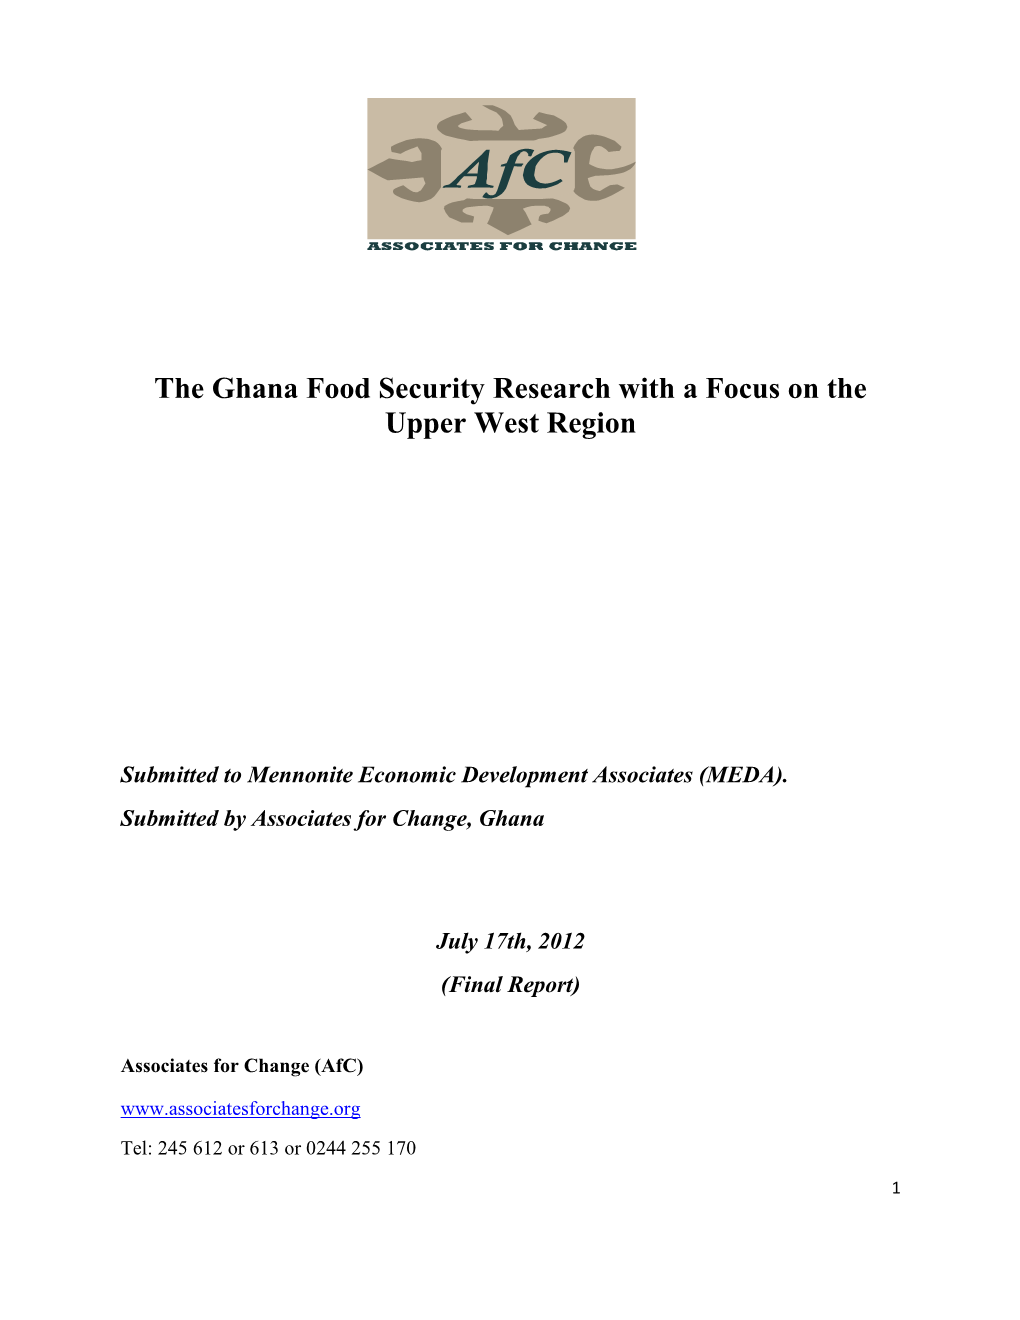 The Ghana Food Security Research with a Focus on the Upper West Region